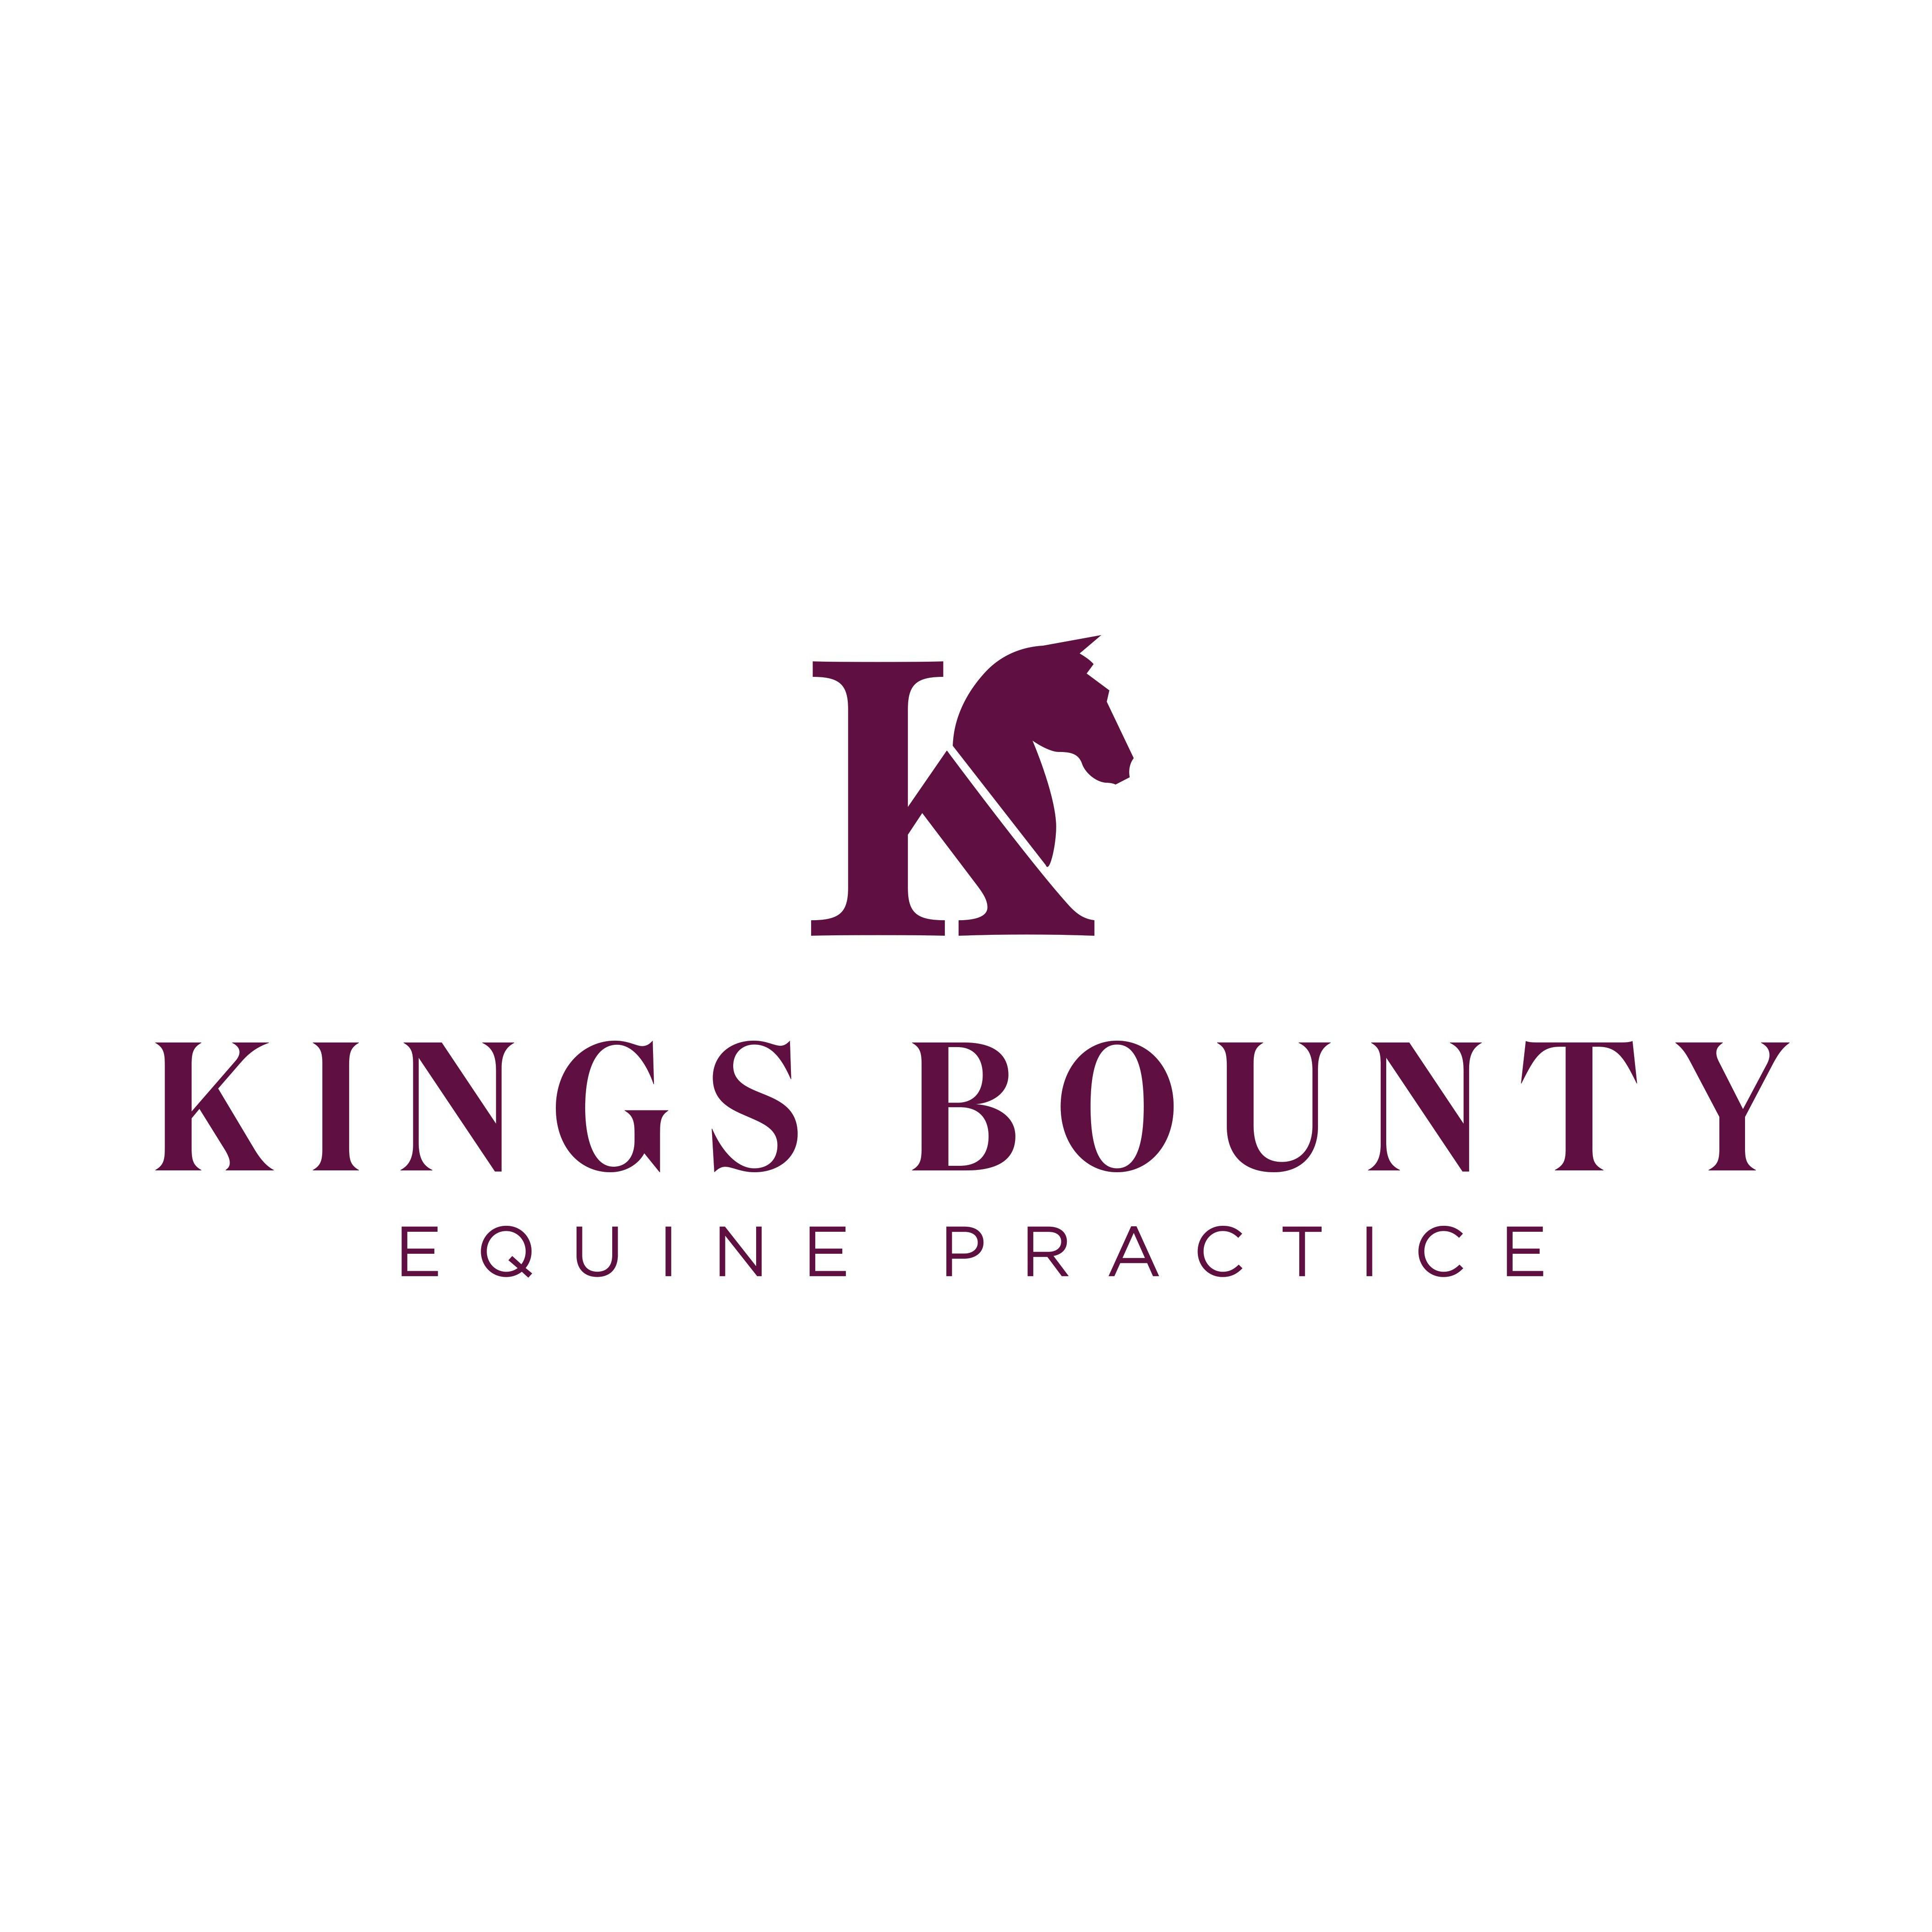 Kings Bounty Equine Practice - Alresford, Hampshire SO24 0HJ - 01420 520164 | ShowMeLocal.com